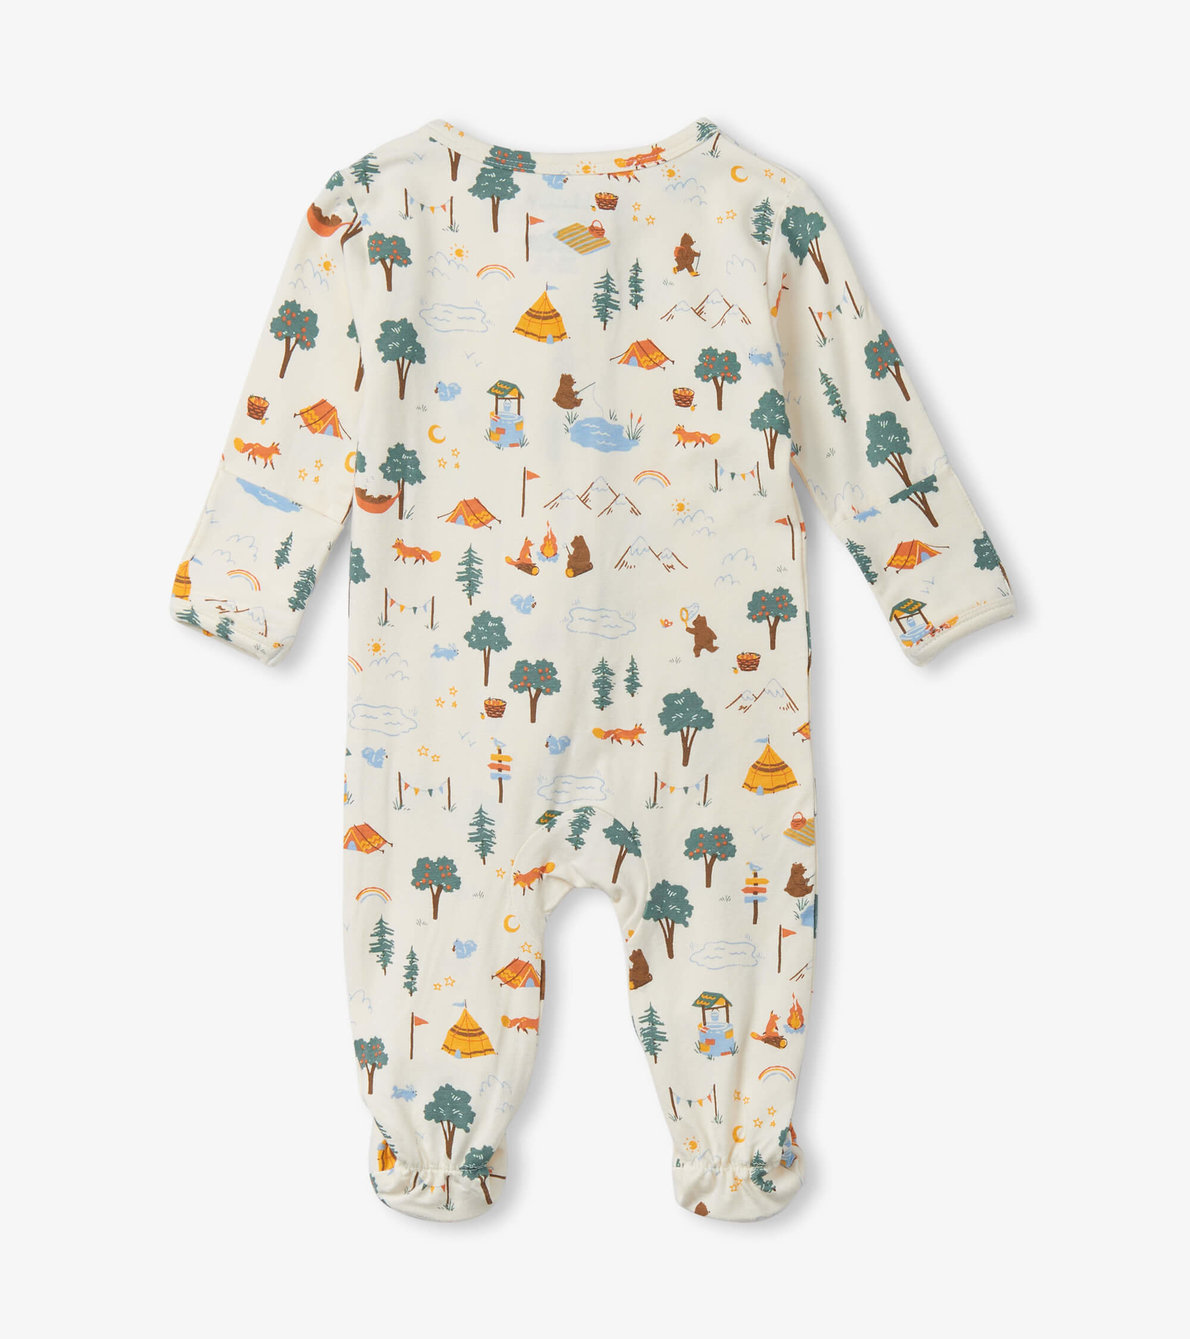 View larger image of Camping Animals Newborn Zip-Up Footed Sleeper